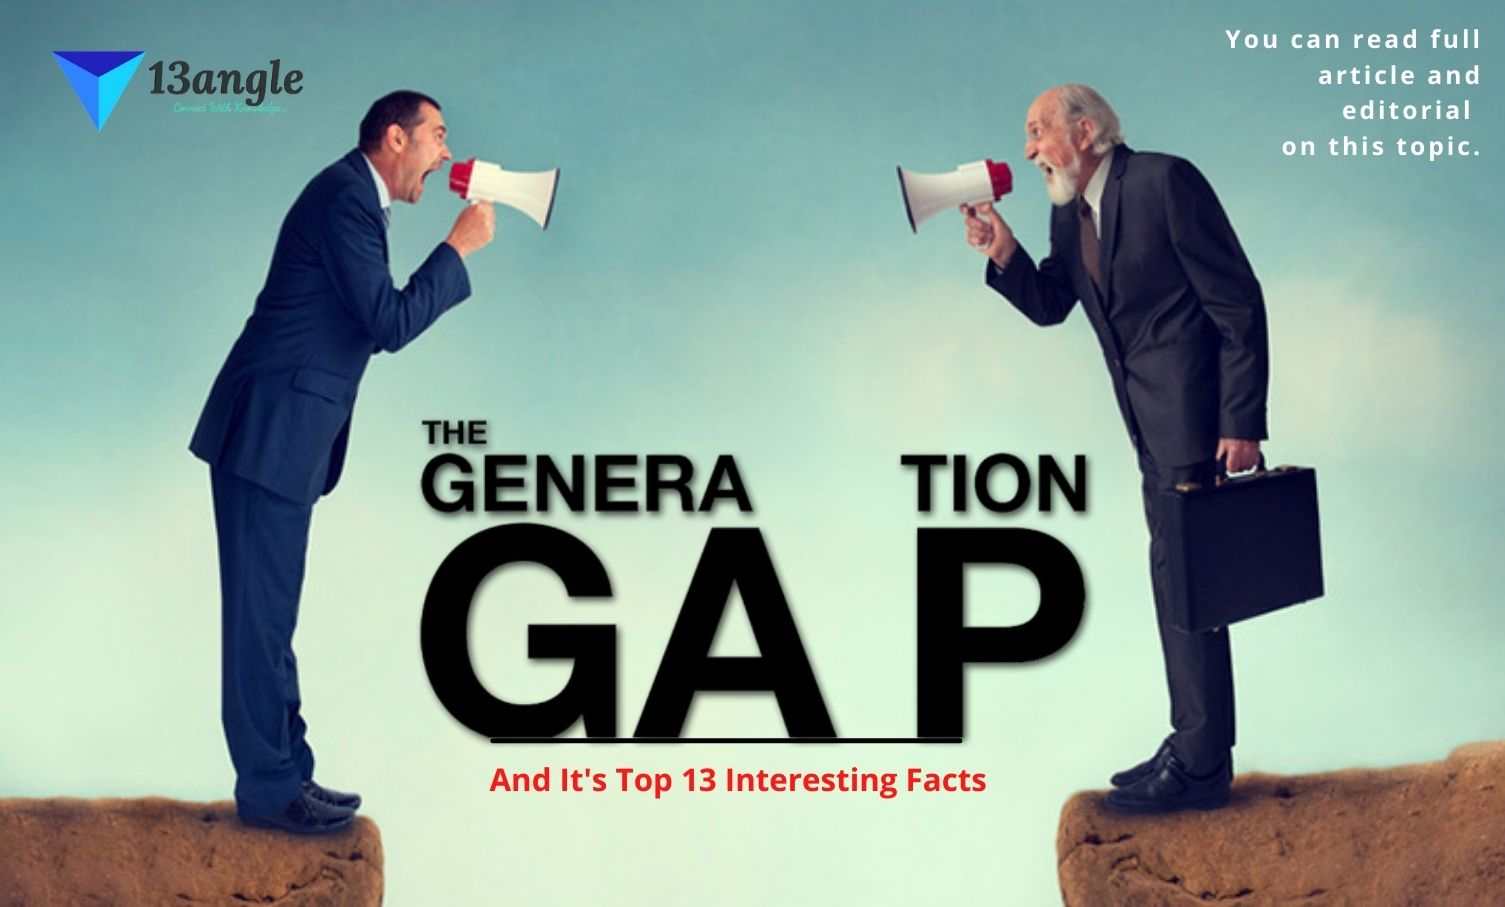 Generation gap And It's Top 13 Interesting Facts- 13angle.com